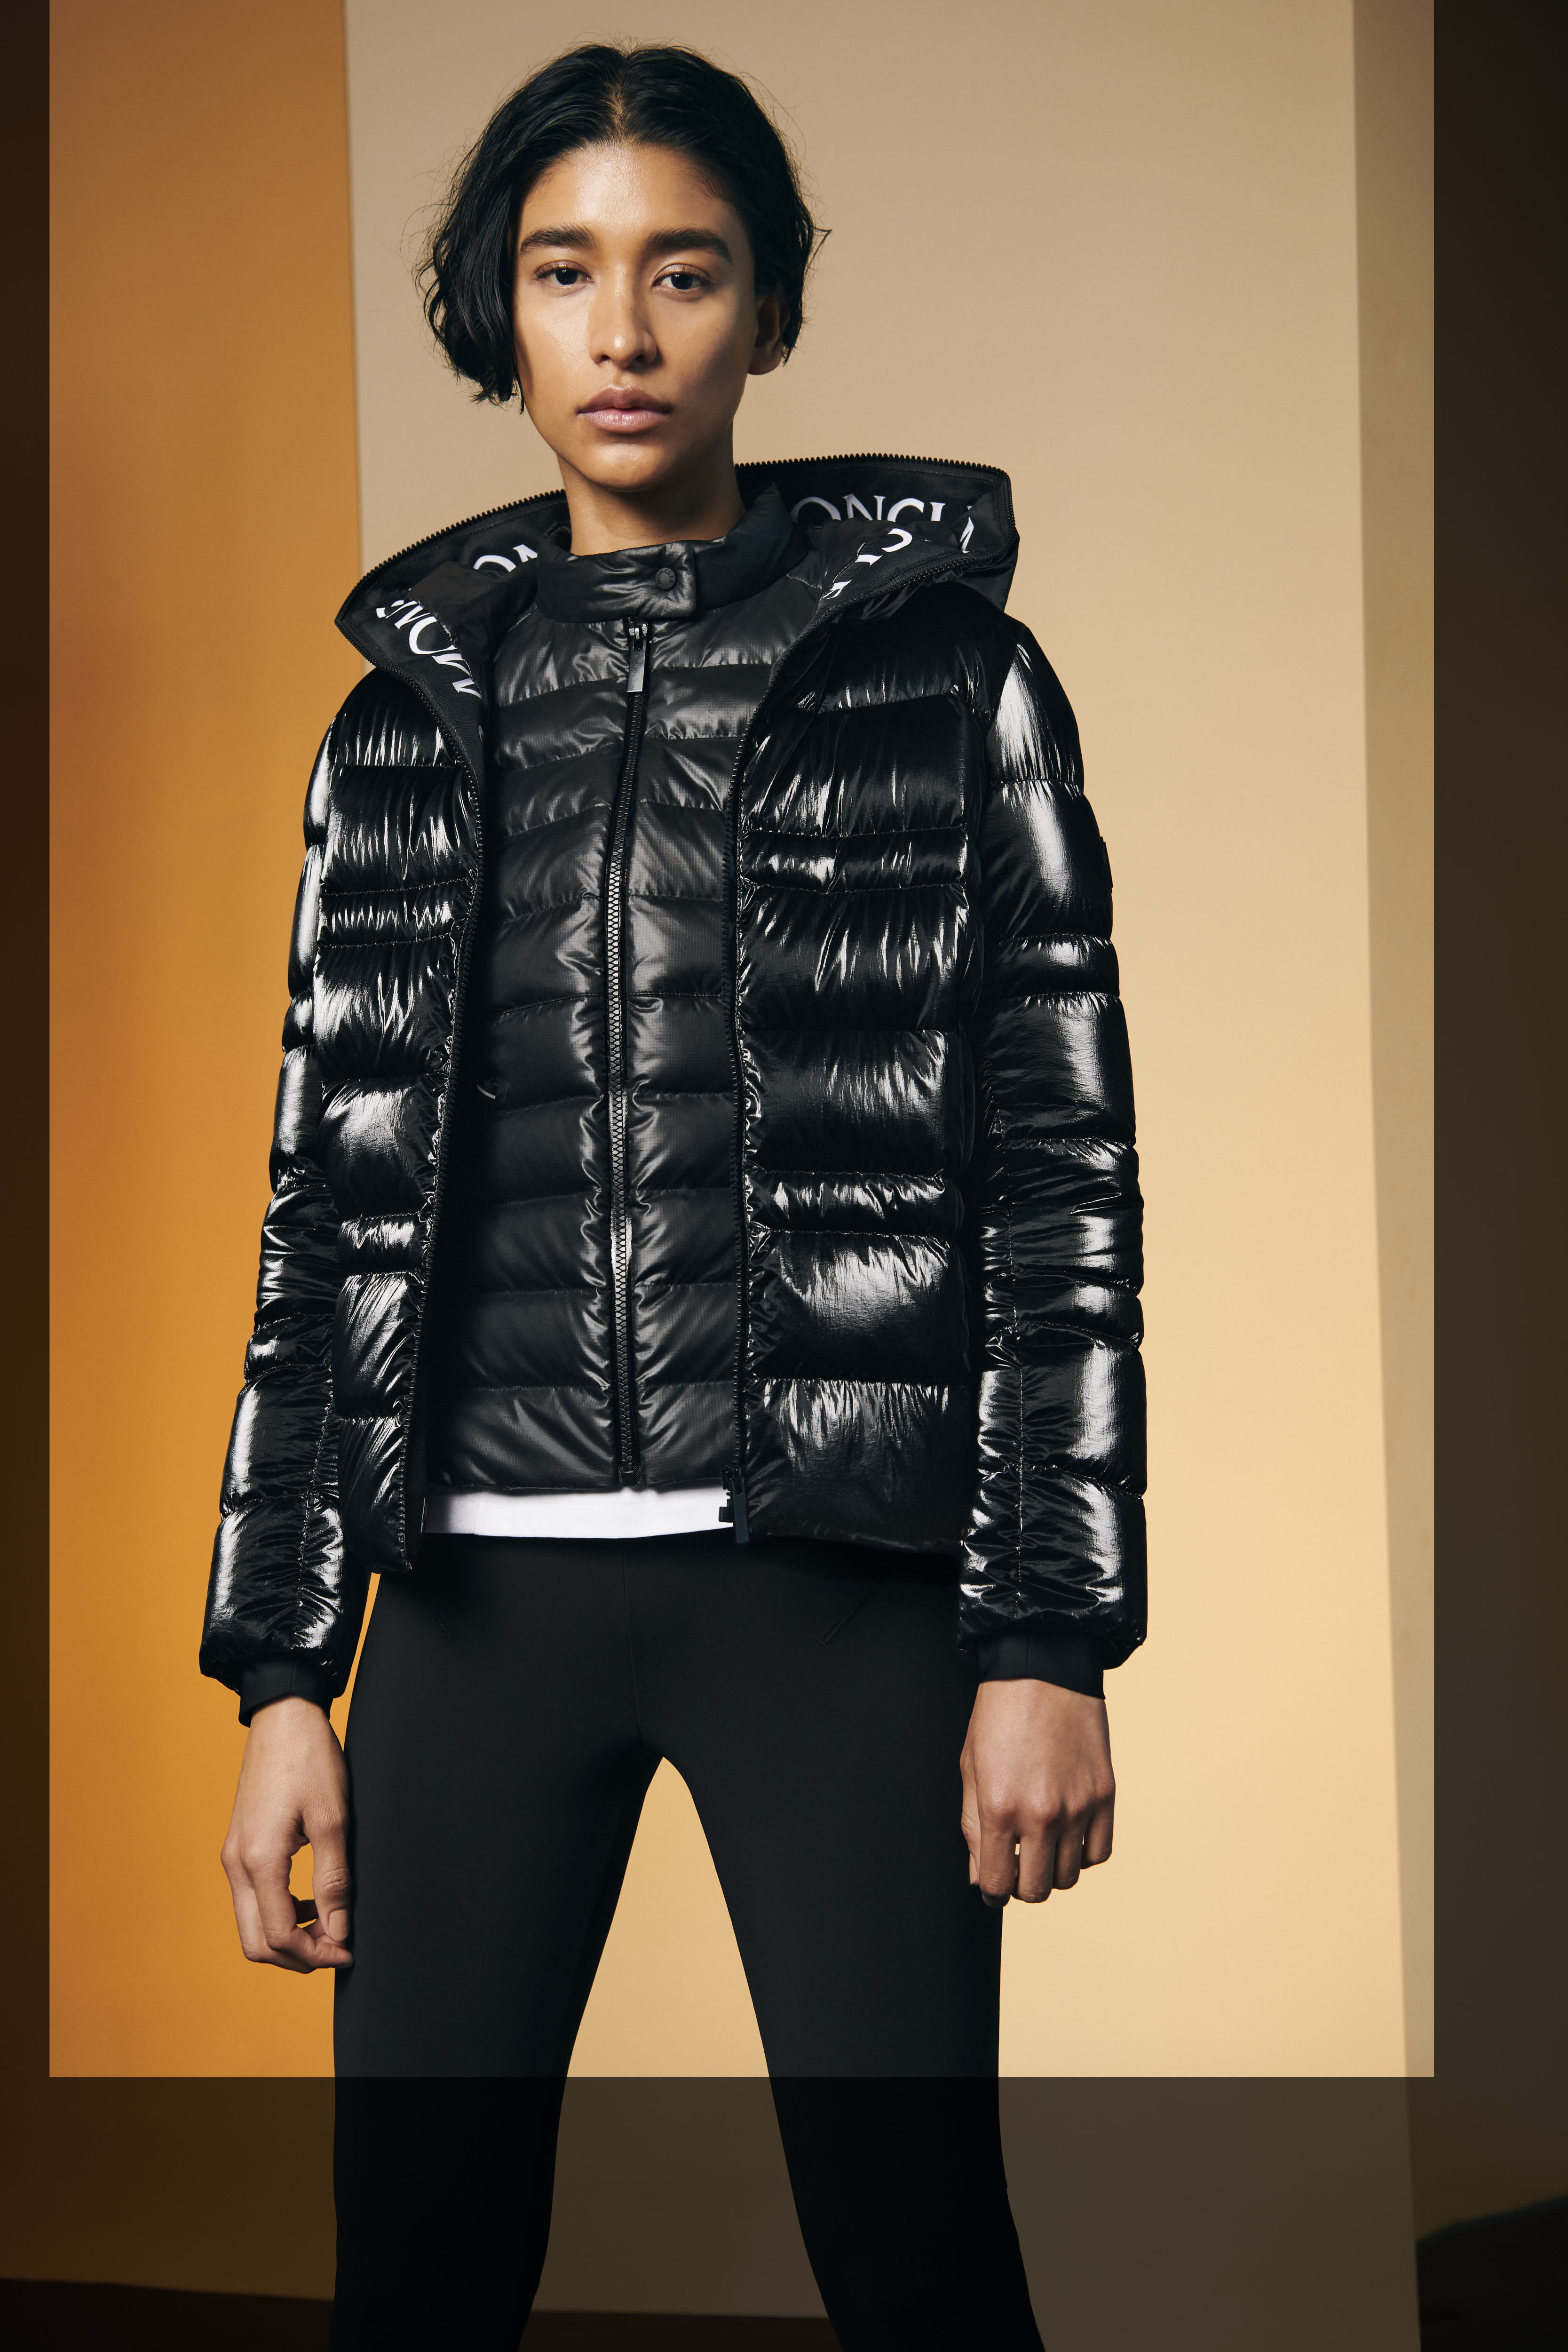 A Moncler and Nordstrom model is shown.